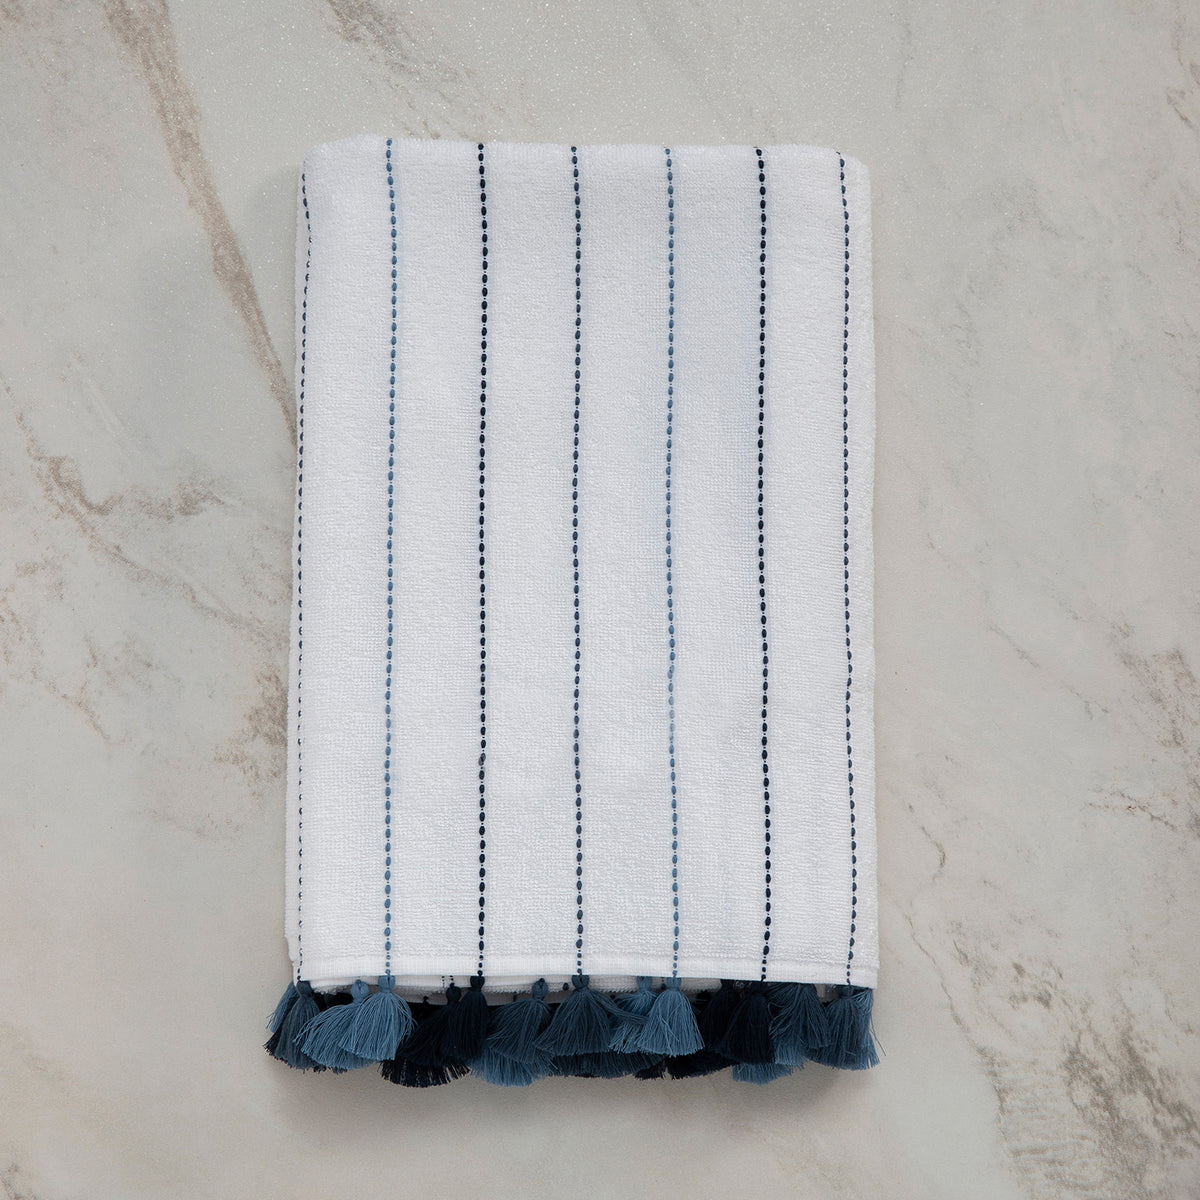 Lina, Terry Towel, Blue Stripes on White, Dark Blue Tassels, ultra soft, very absorbent 